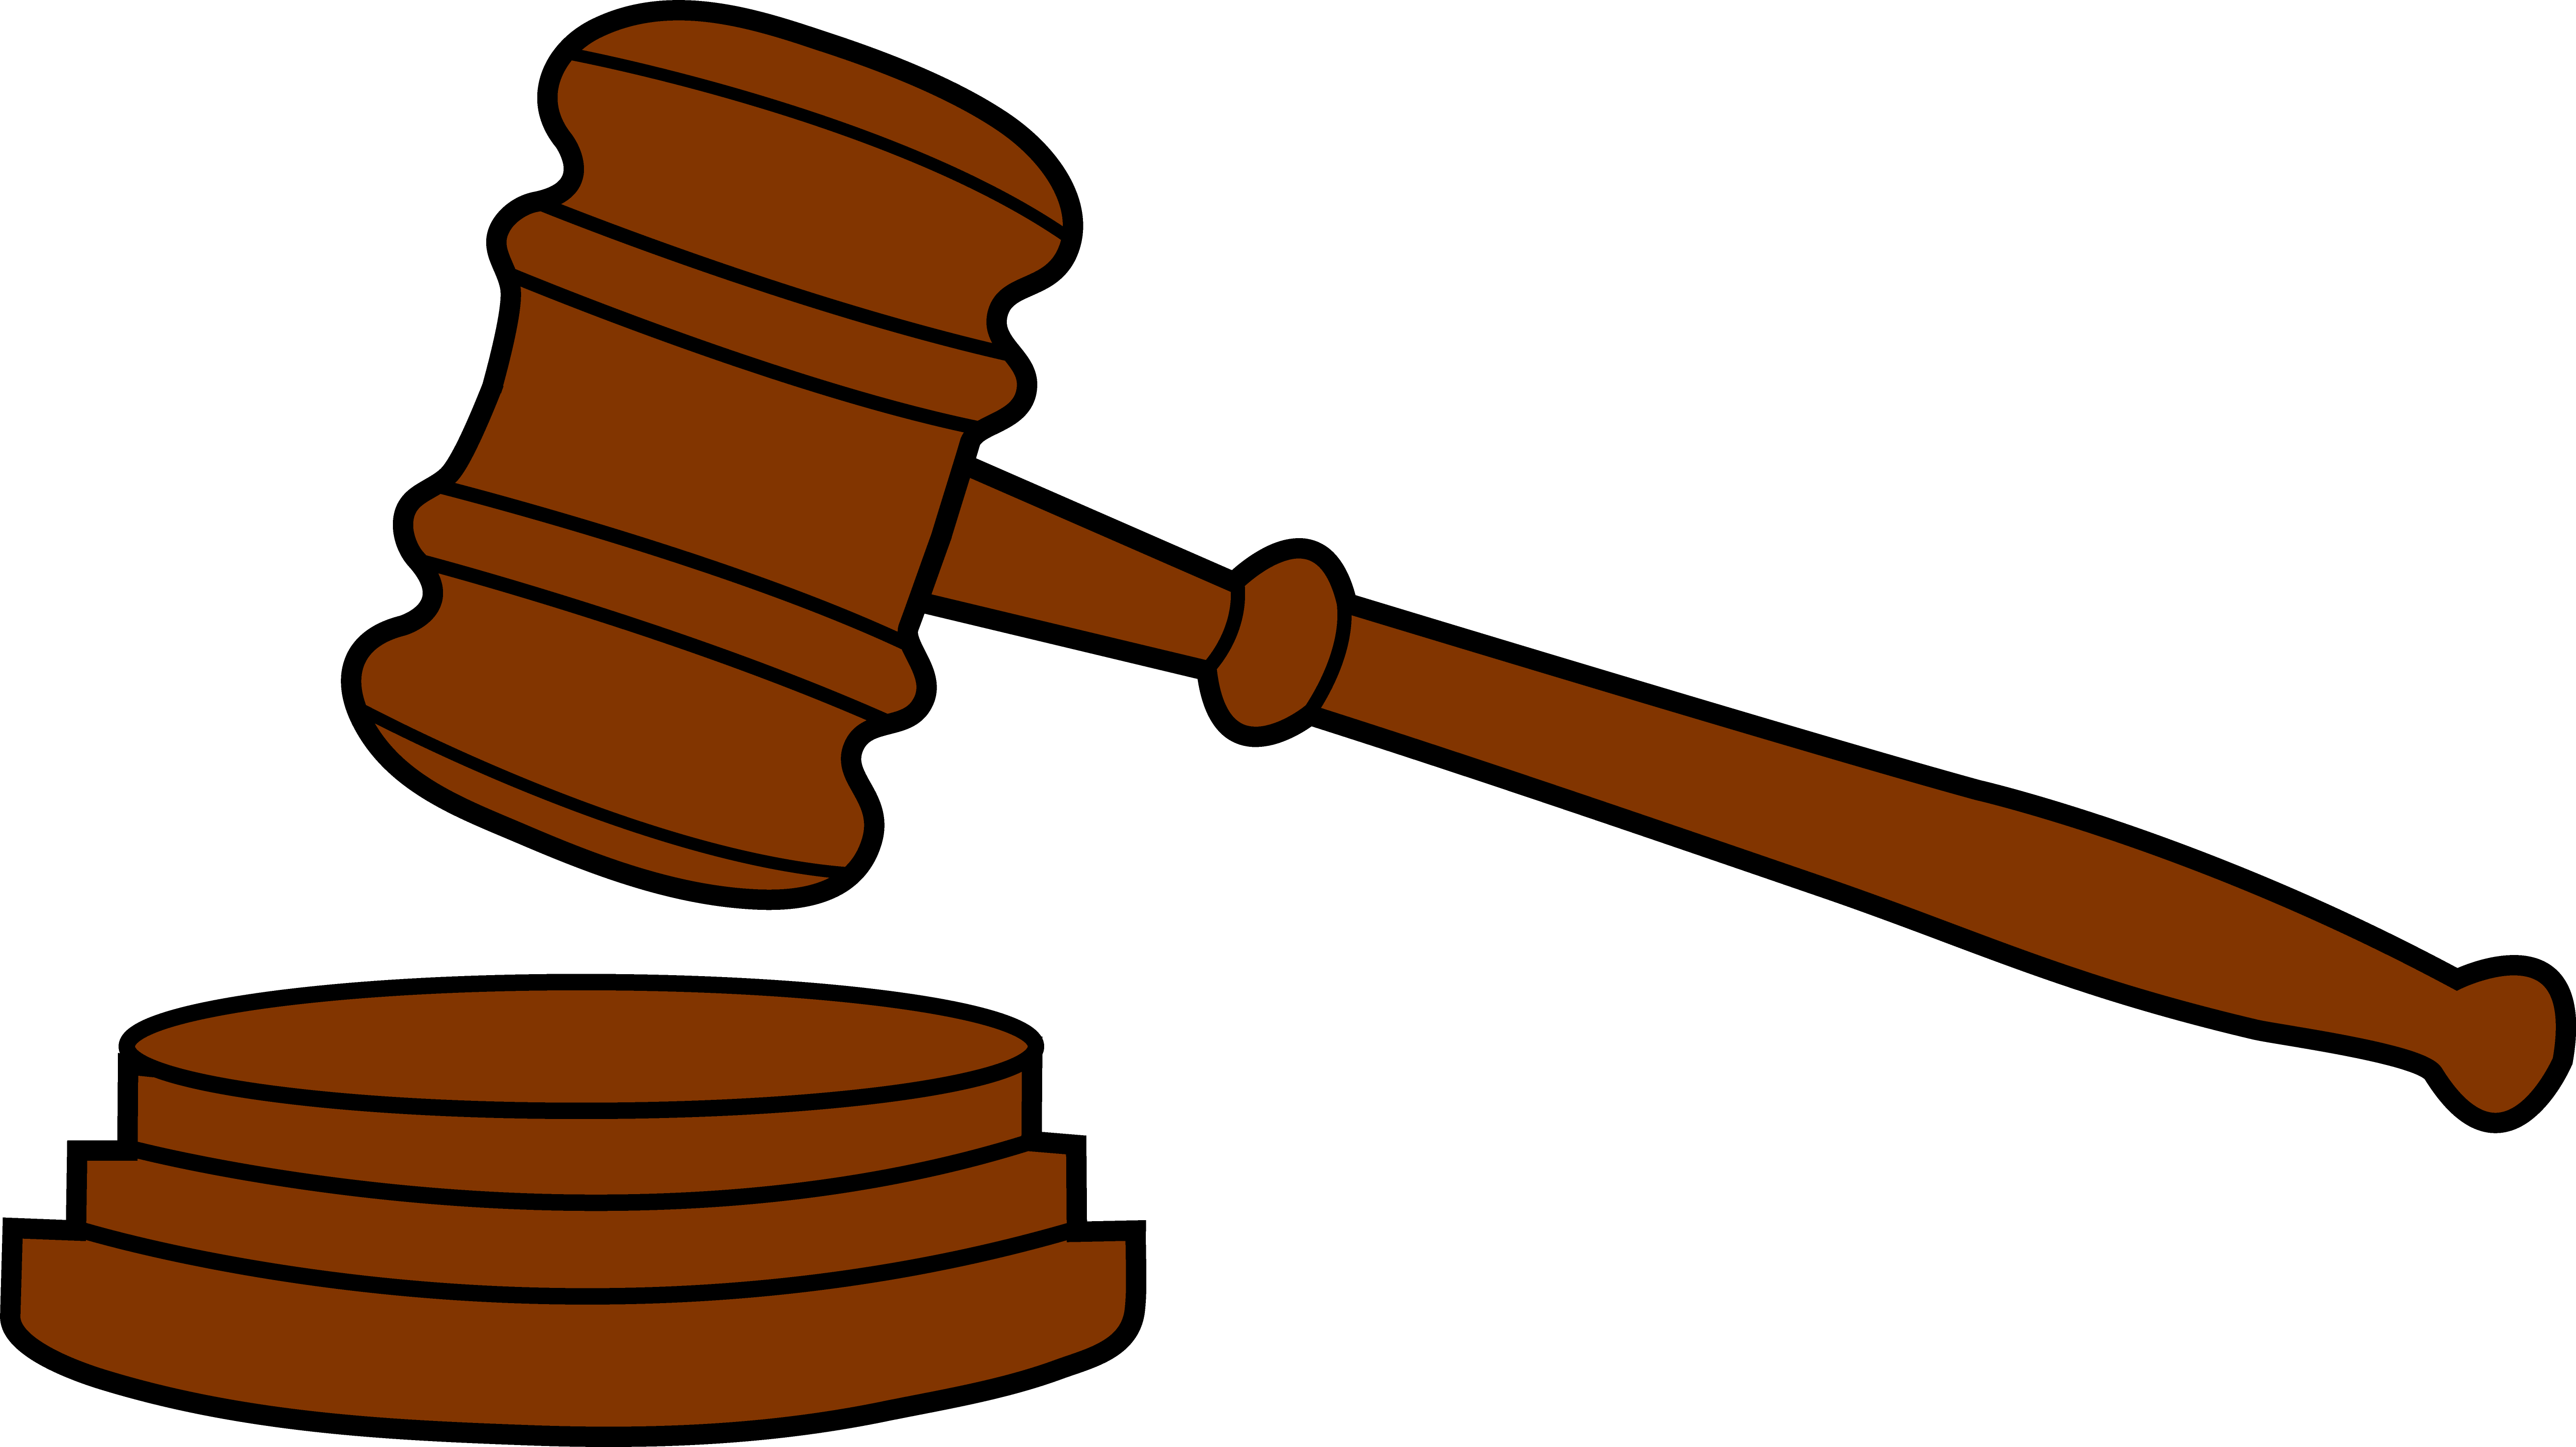 microsoft clip art scales of justice - photo #30